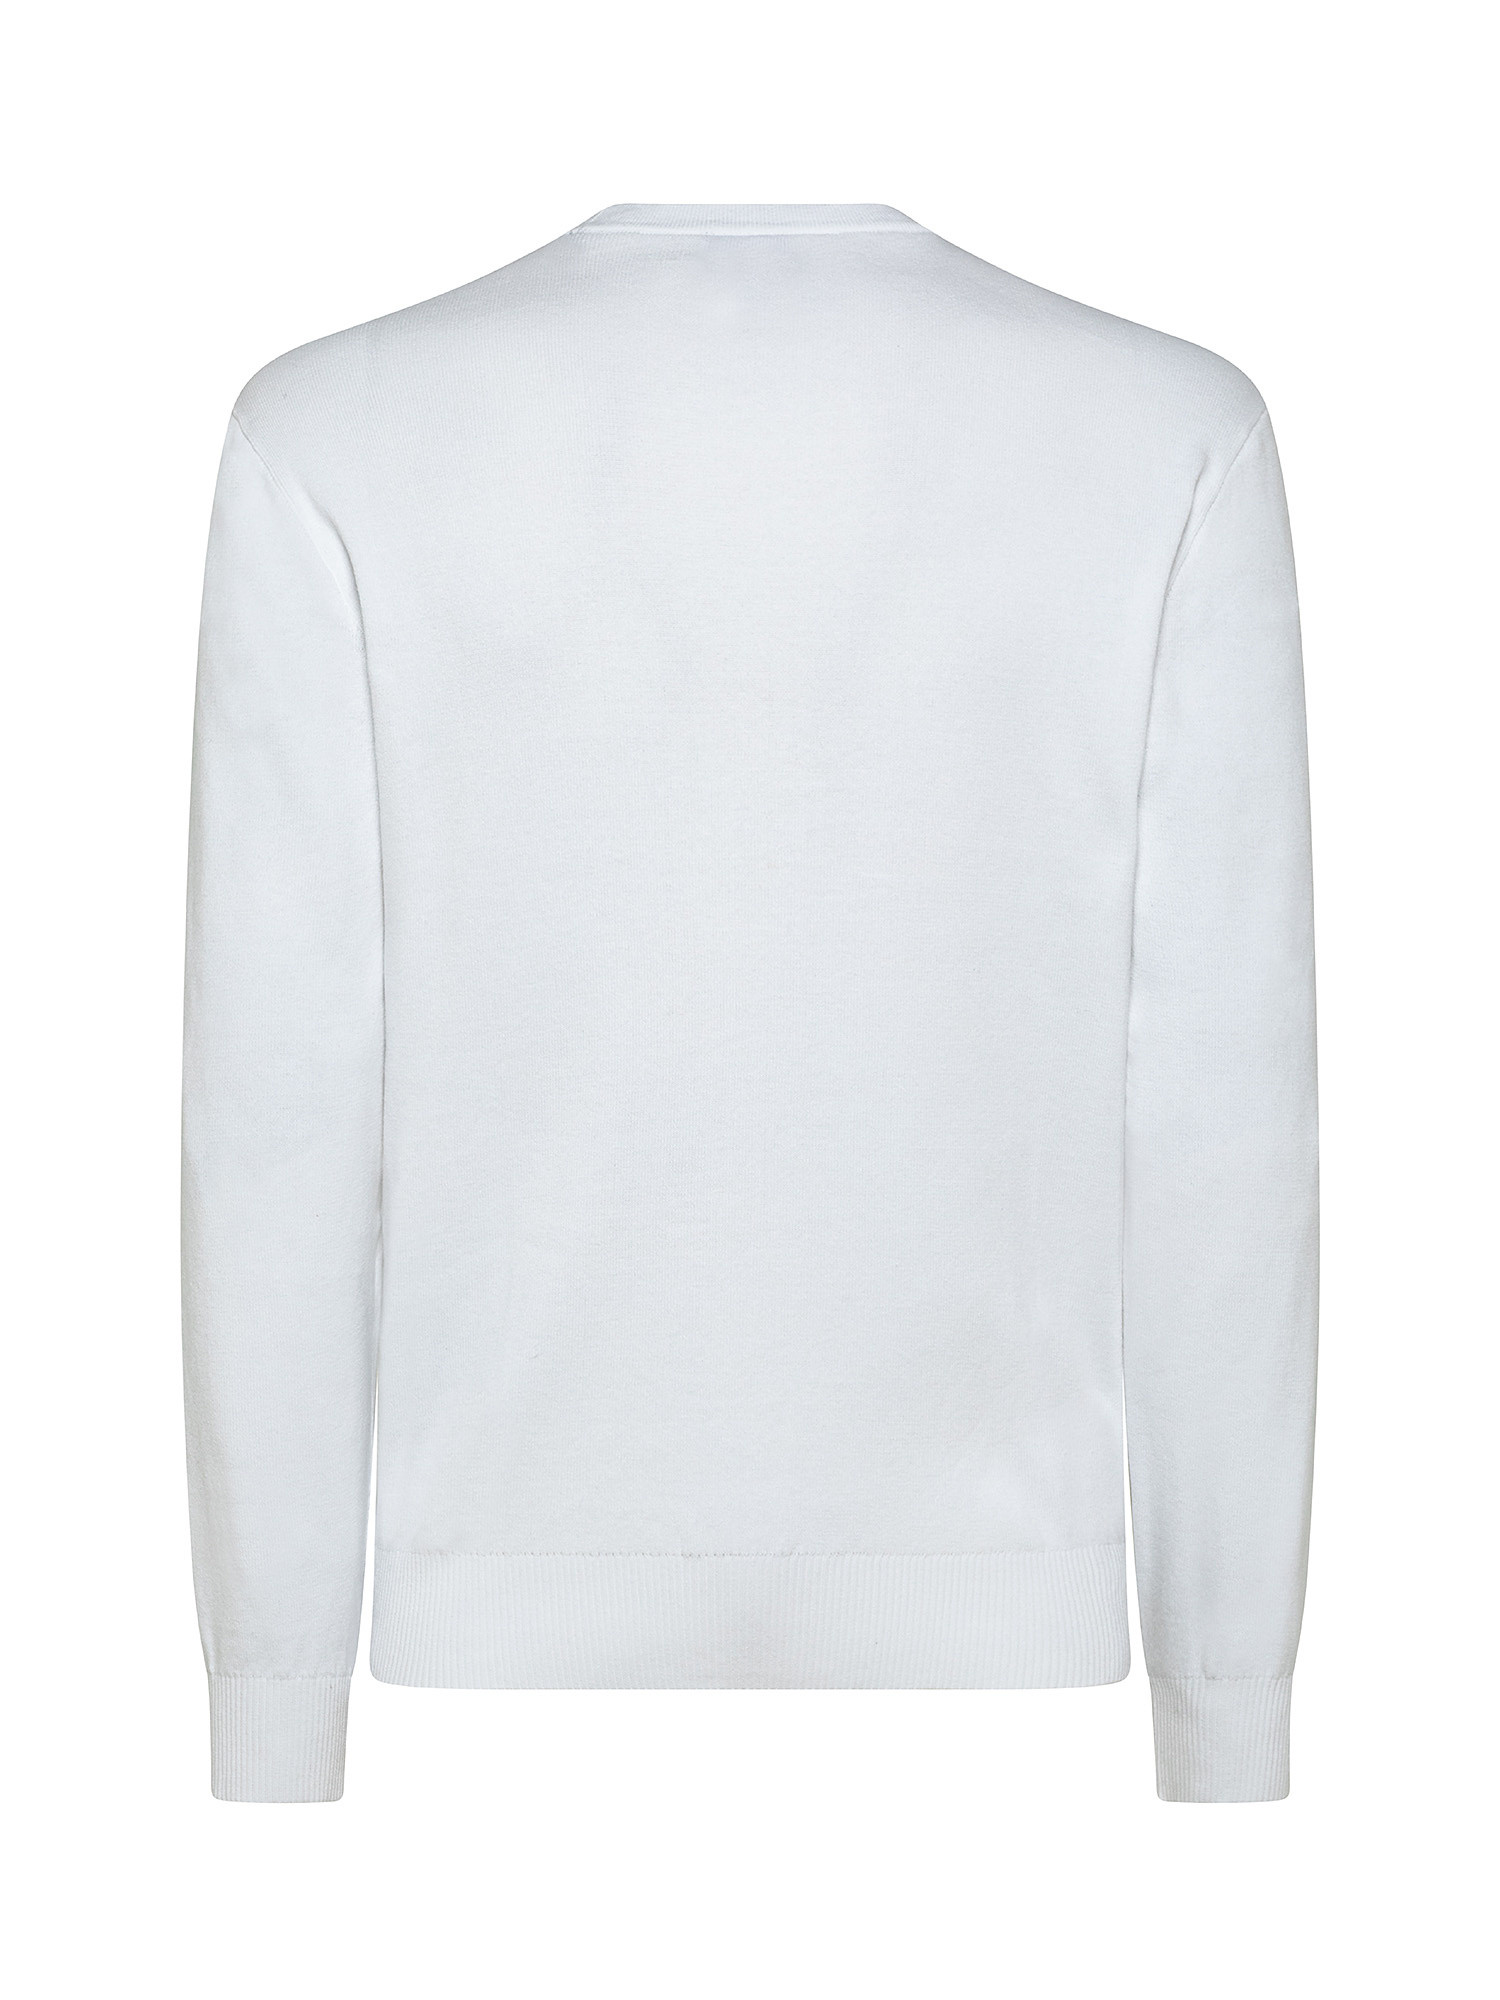 Pullover, White, large image number 1